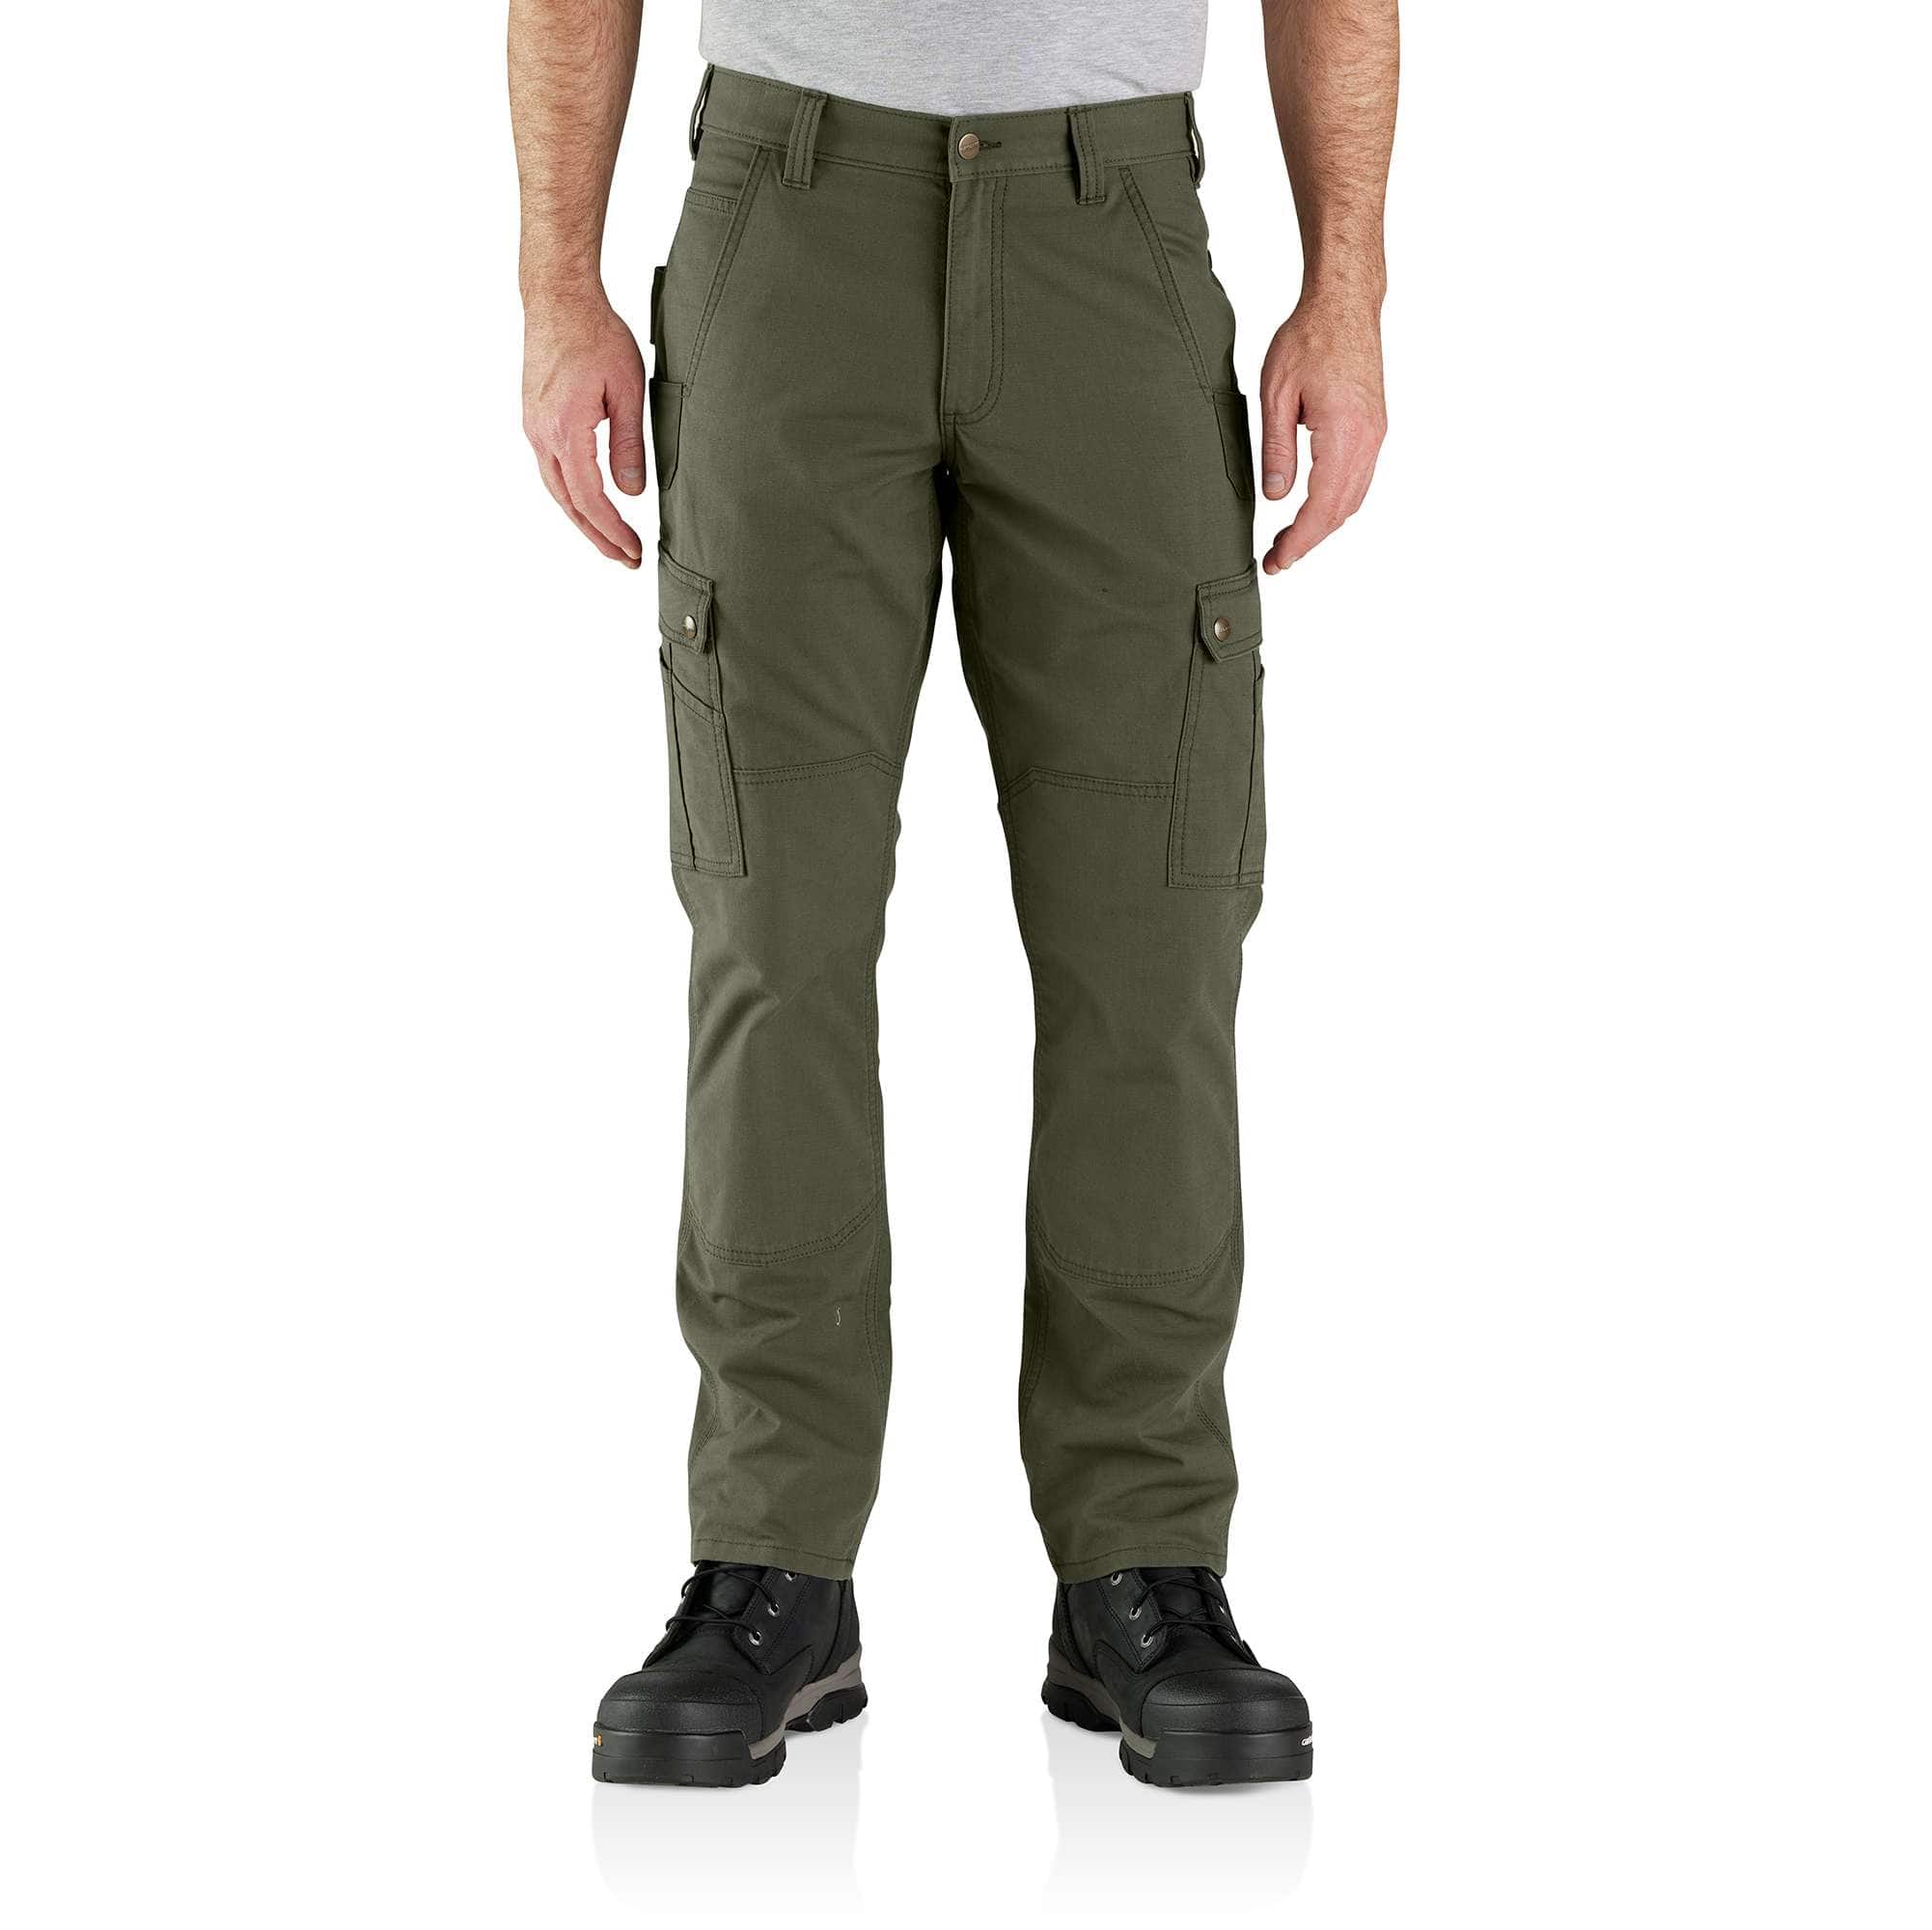 RUGGED FLEX RELAXED FIT RIPSTOP CARGO WORK PANT